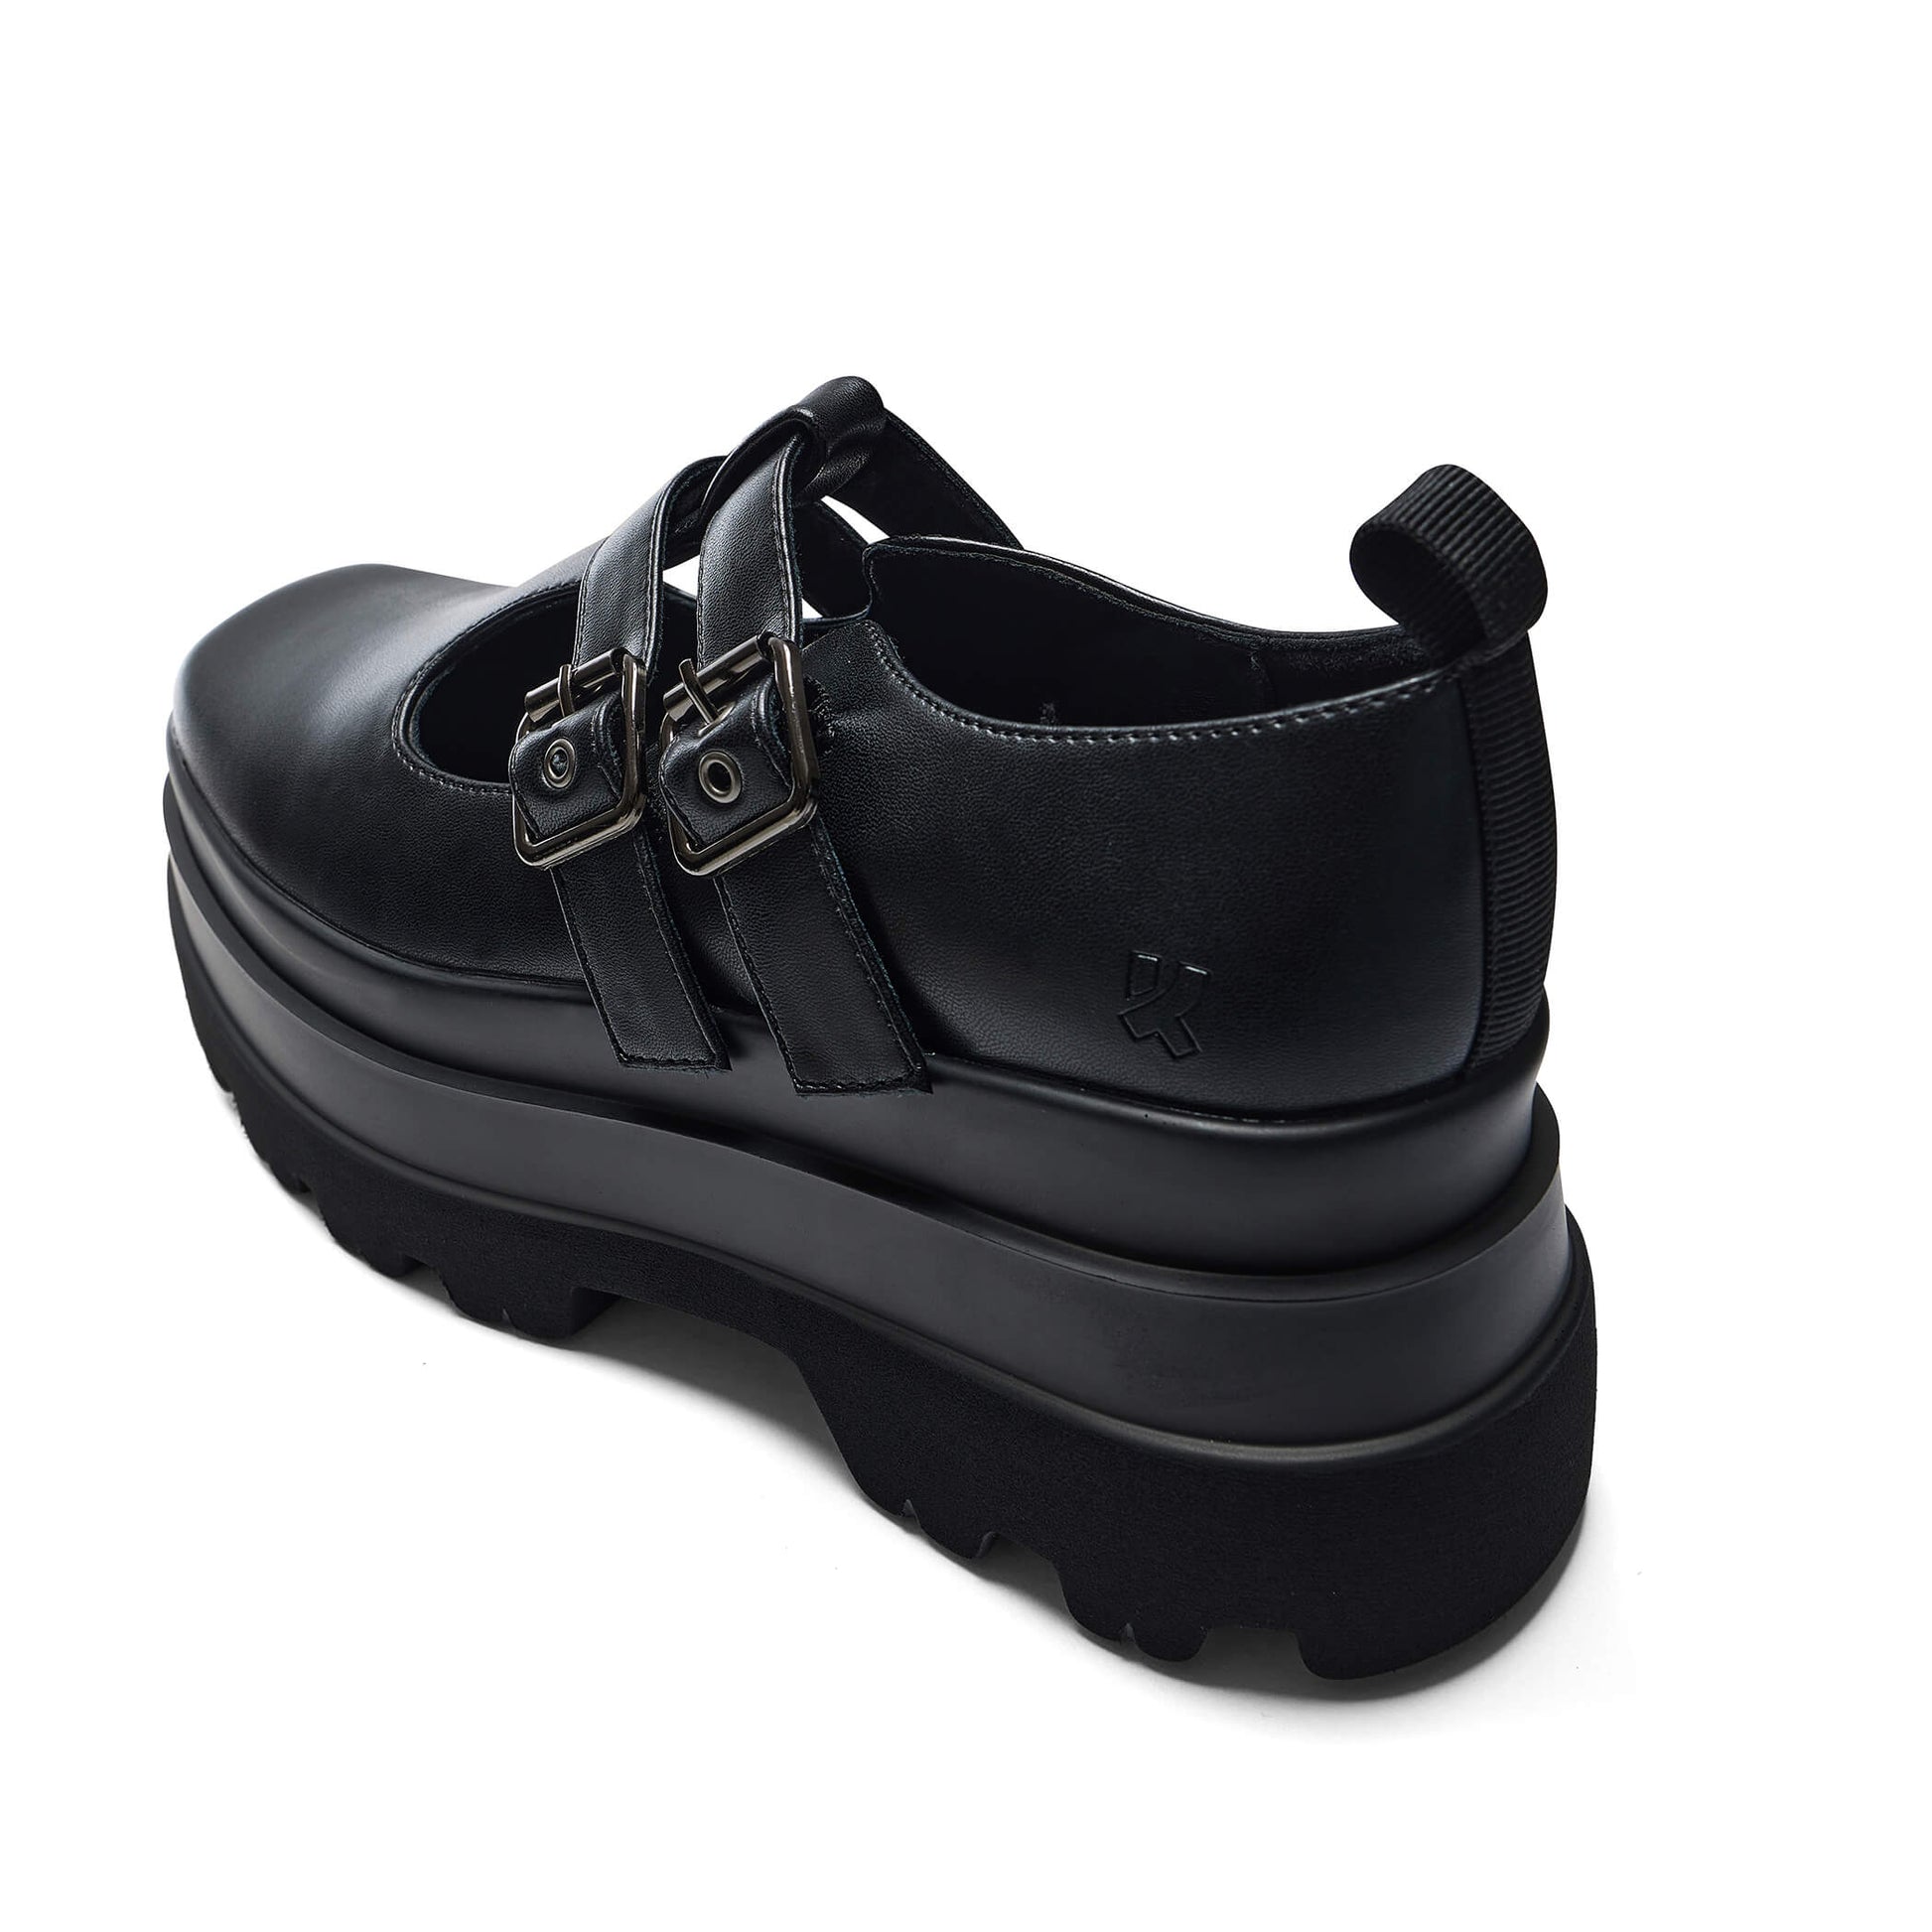 The Conquest Trident Mary Janes - Shoes - KOI Footwear - Black - Back Detail